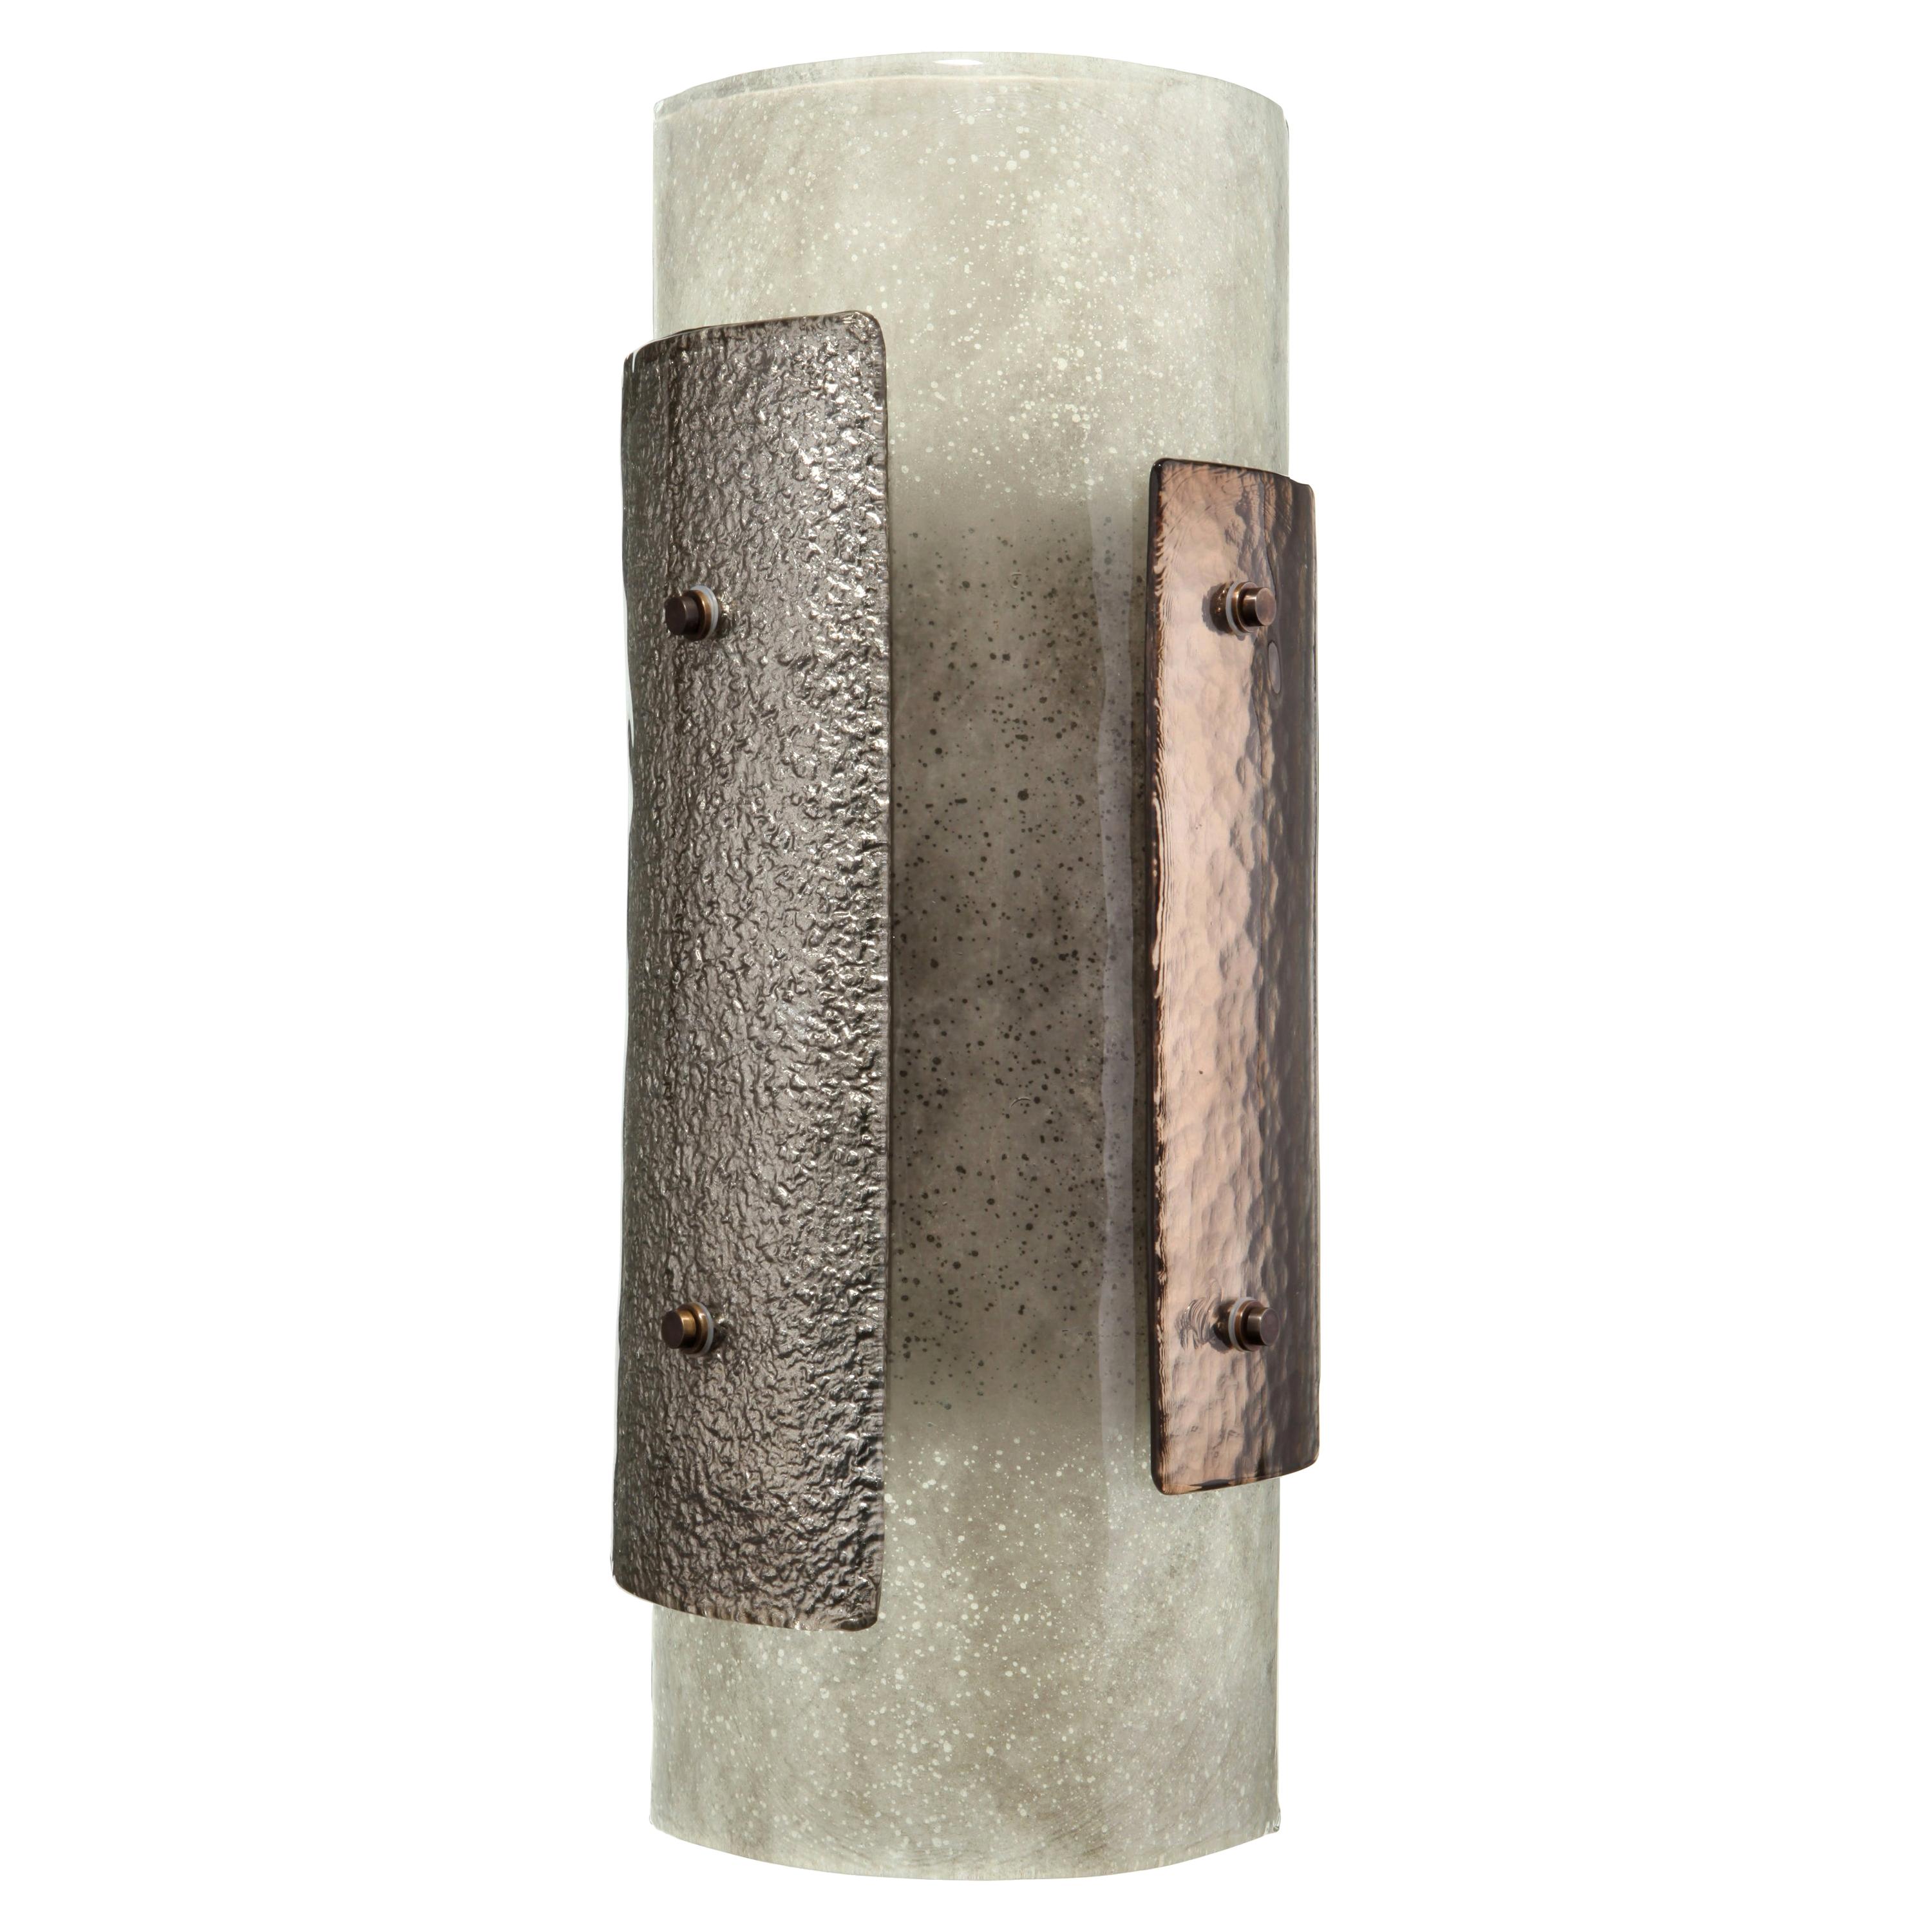 The Torcello sconce, like the Elba Sconce takes its inspiration from the Brutalist era of the 20th century. Consisting of three types of handcrafted Murano glass, with silver leaf and patinated brass detailing and fixings.

Wired for the EU, this